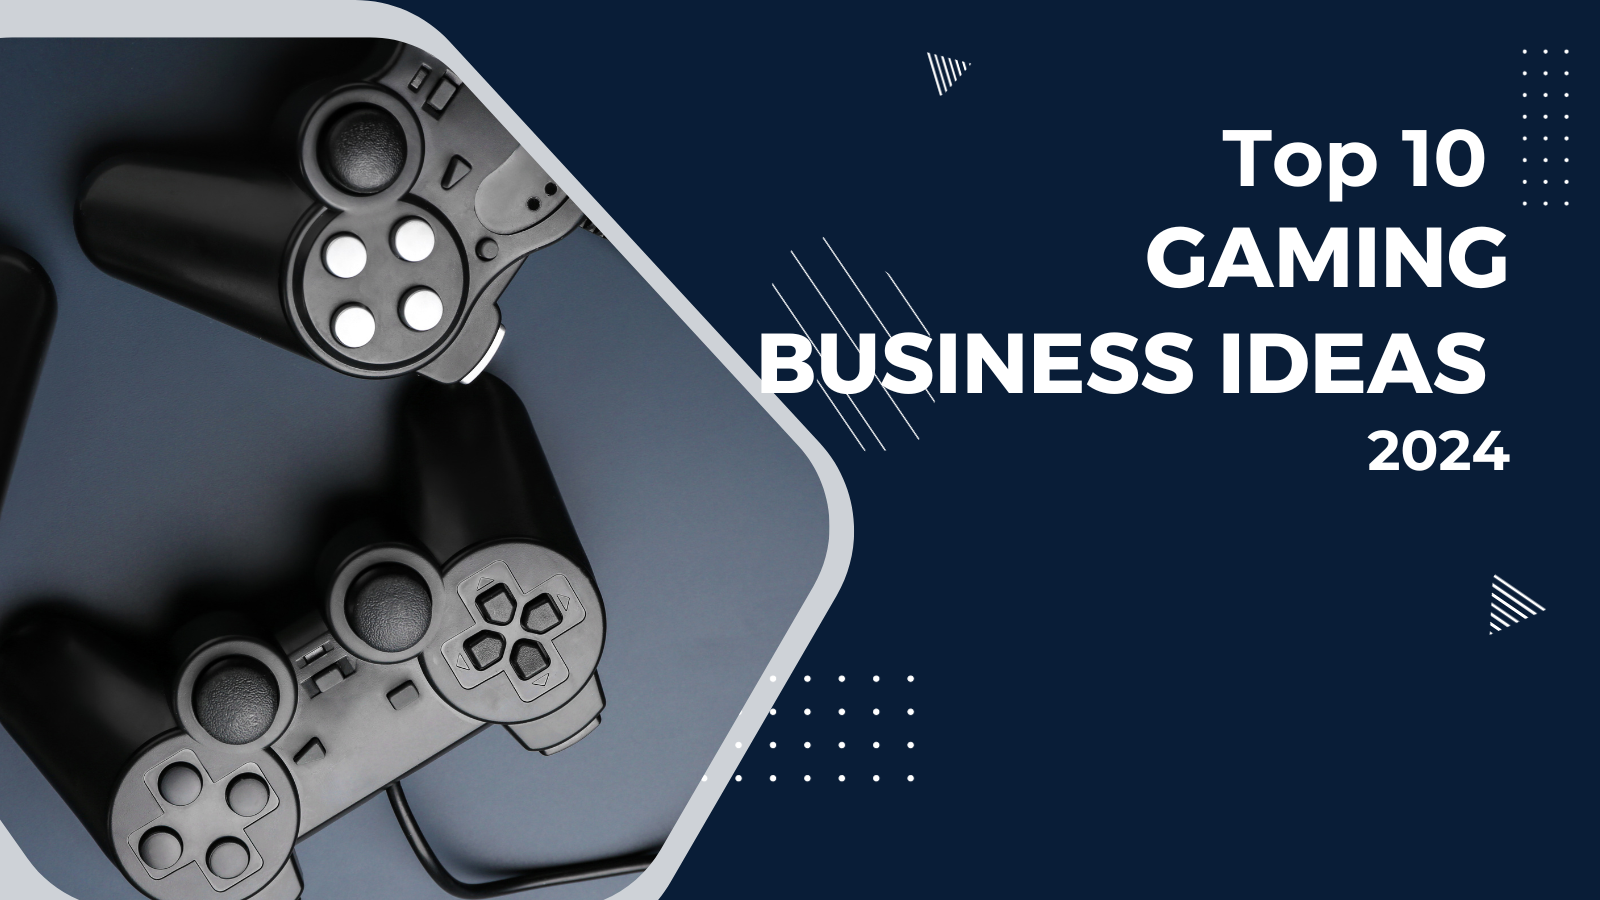 Top 10 Gaming Business Ideas for Gamers In 2024